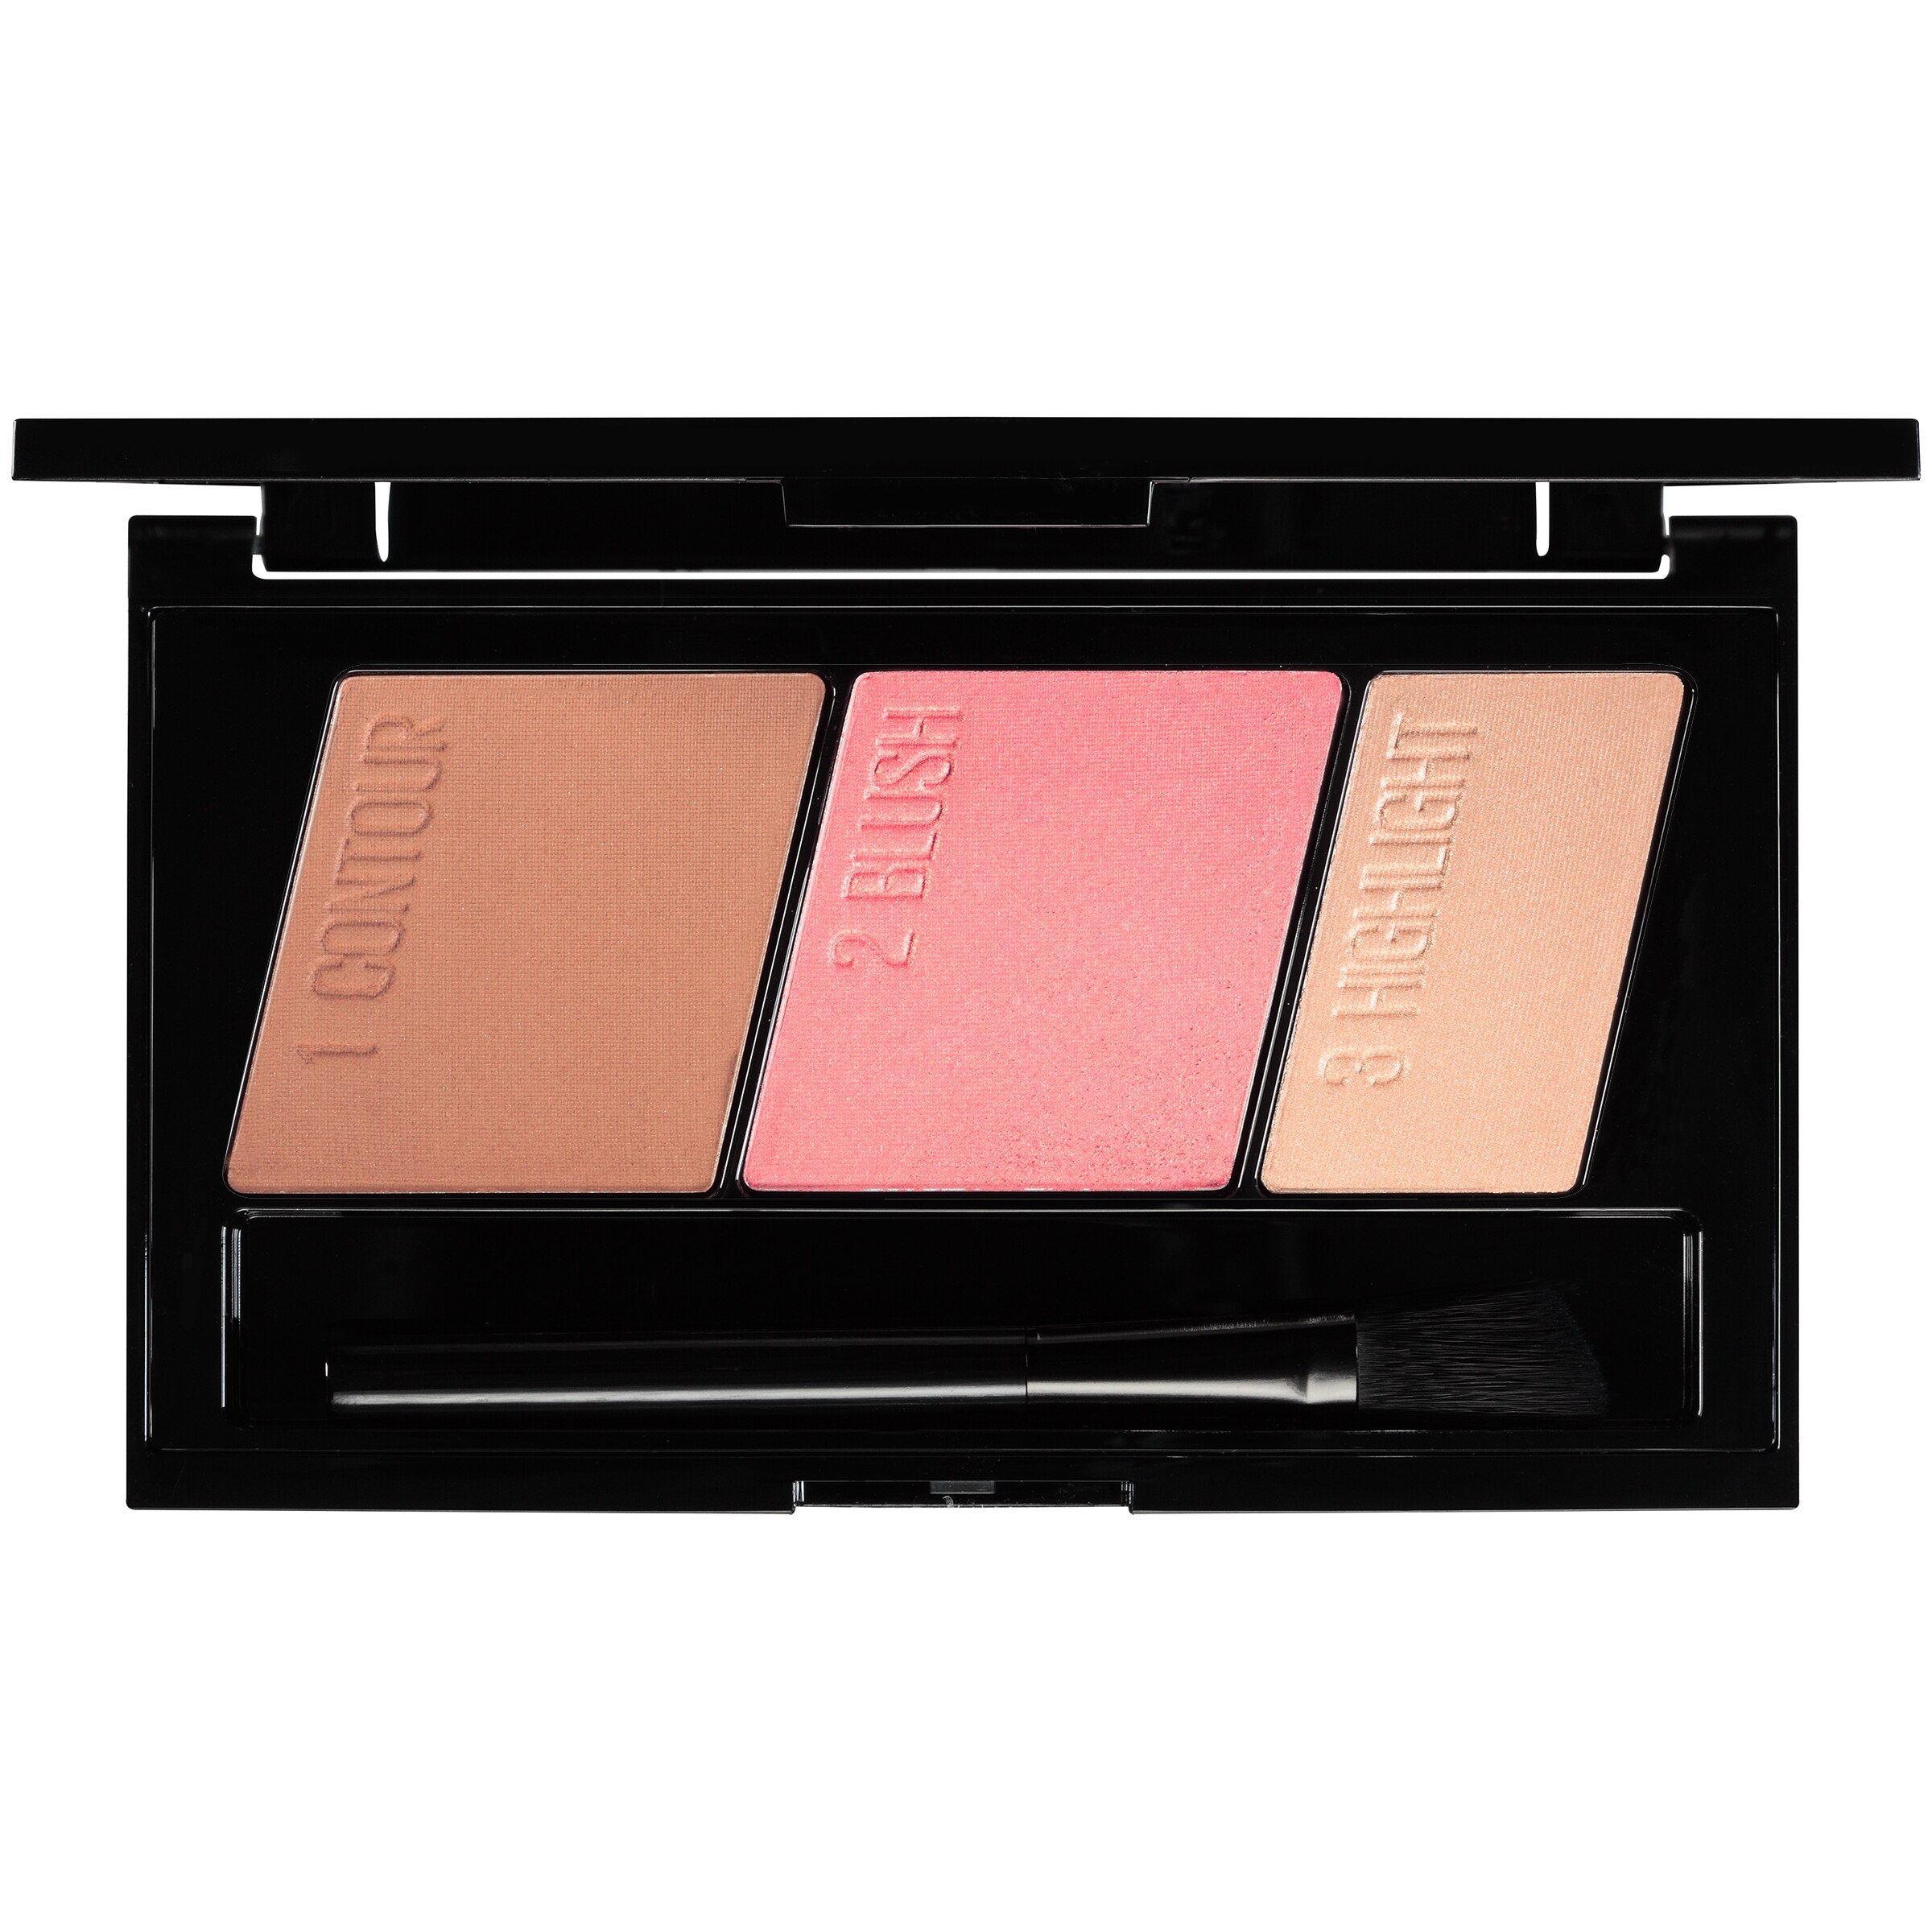 Maybelline Face Studio Master Contour | Pick Up In Store TODAY at CVS